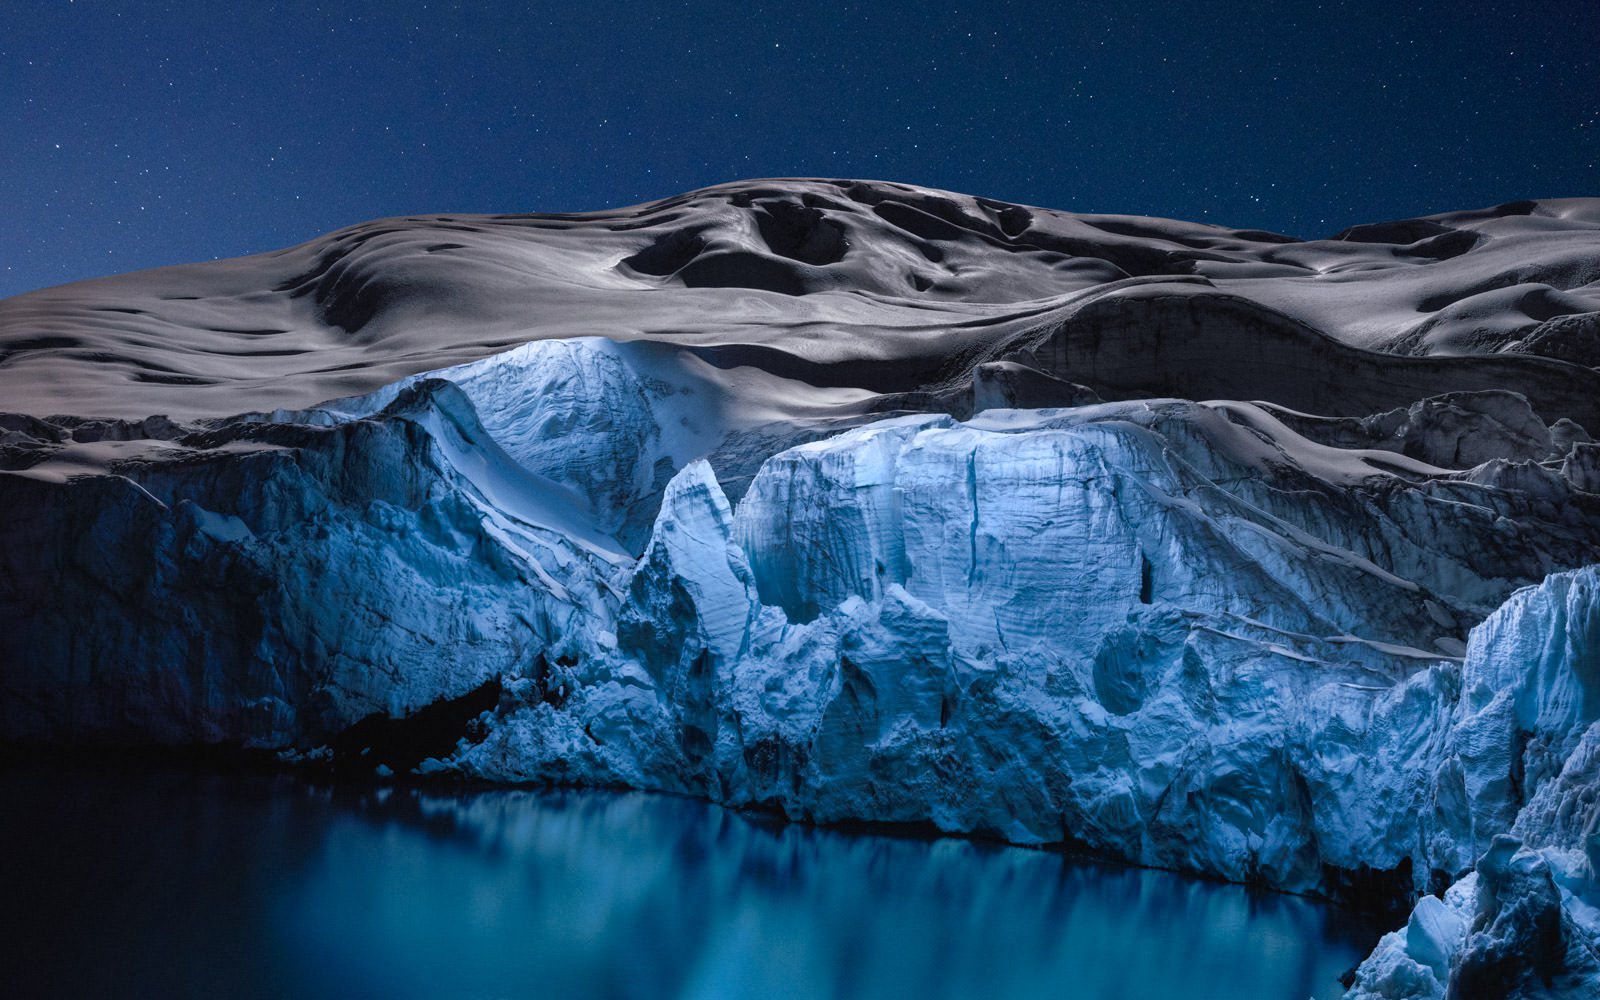 Glaciers dramatically lit up at night by a drone